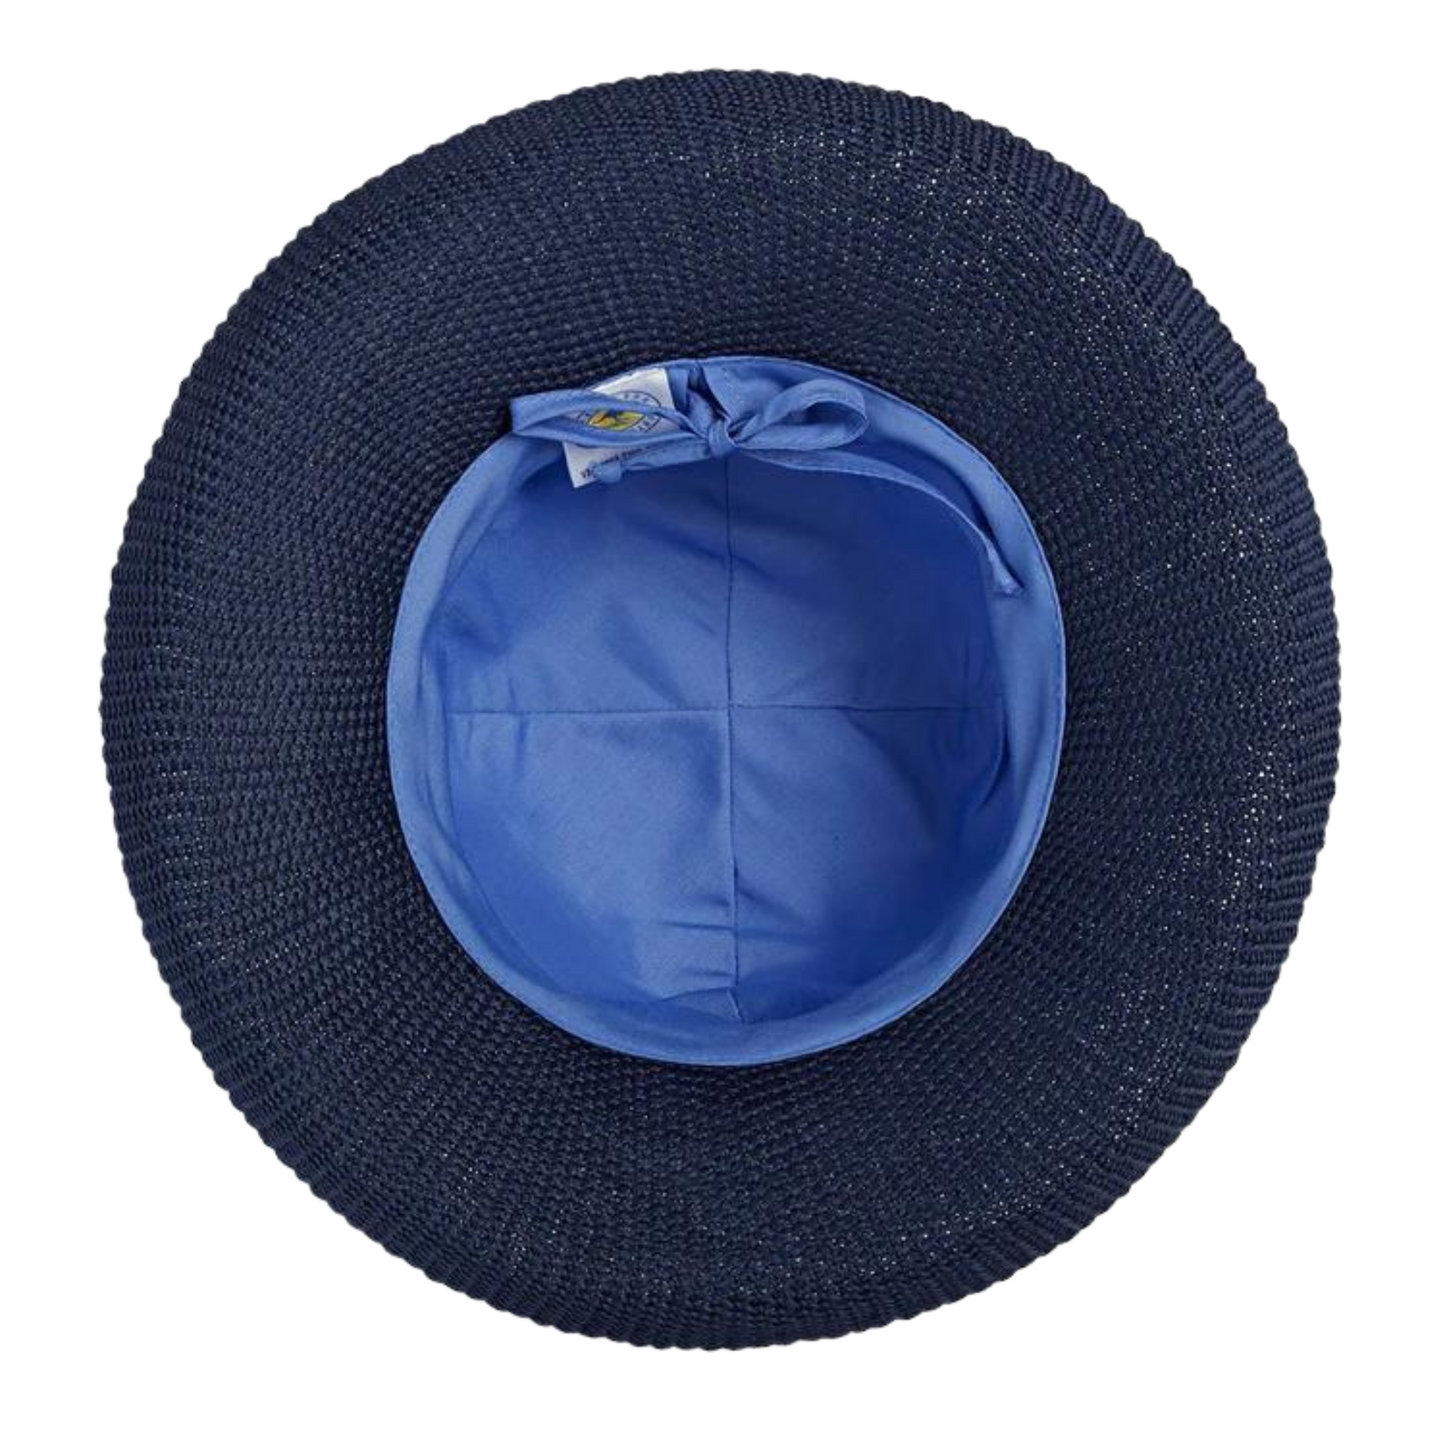 Hat pictured from below shows the dark navy brim connected to a fabric lining in light lilac blue with drawstring.